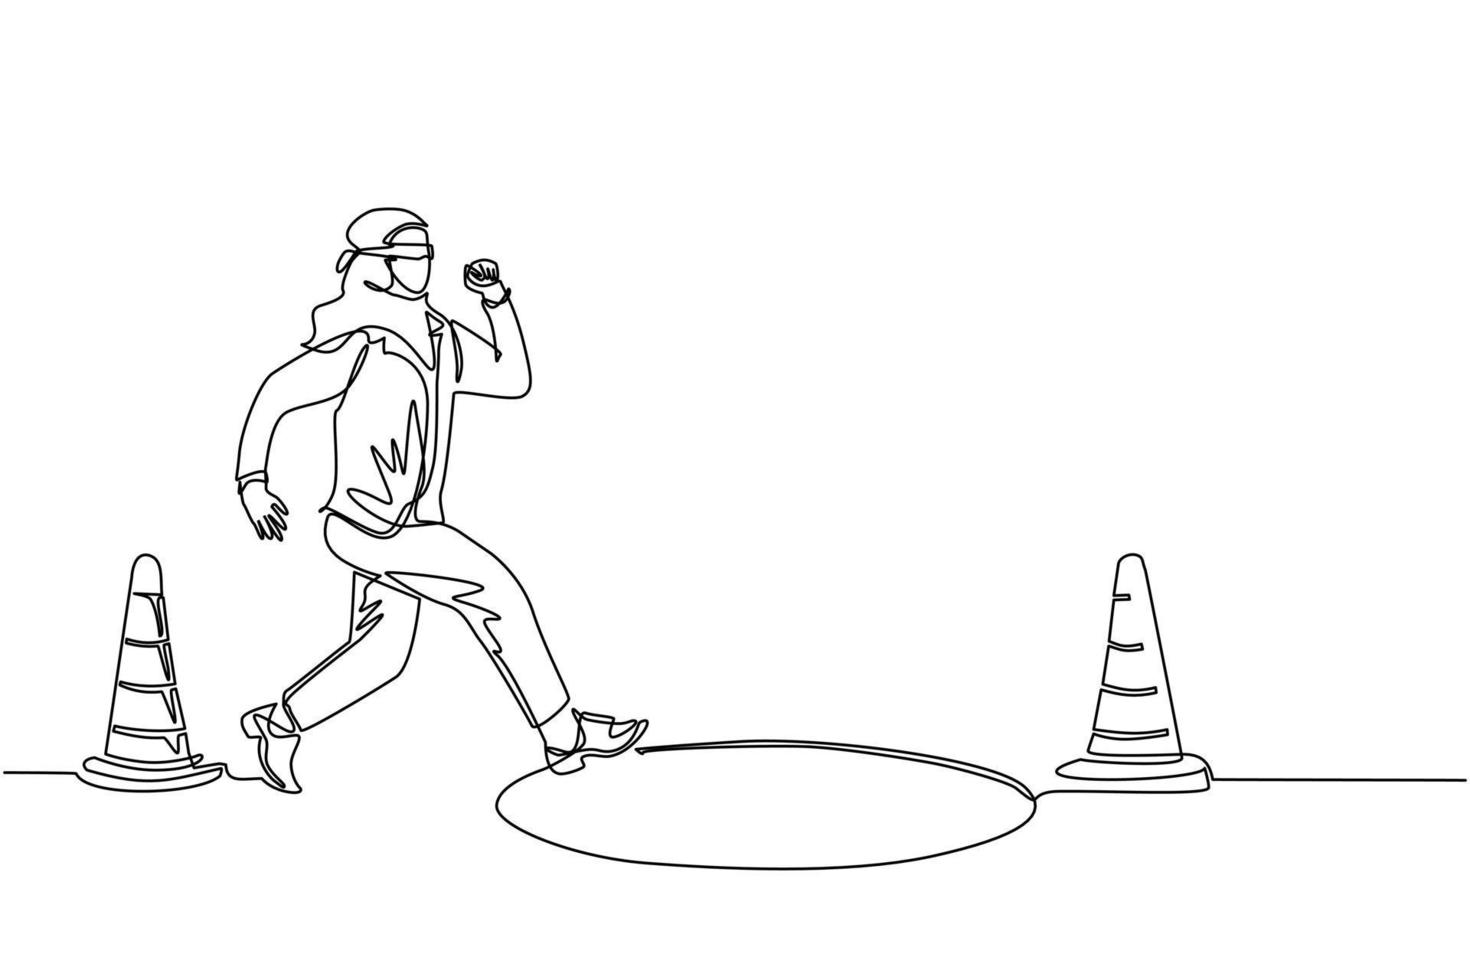 Single one line drawing blindfolded Arab businesswoman running to find money with pit hole. Woman runs to business trap. Blind investment concept. Metaphor. Continuous line draw design graphic vector